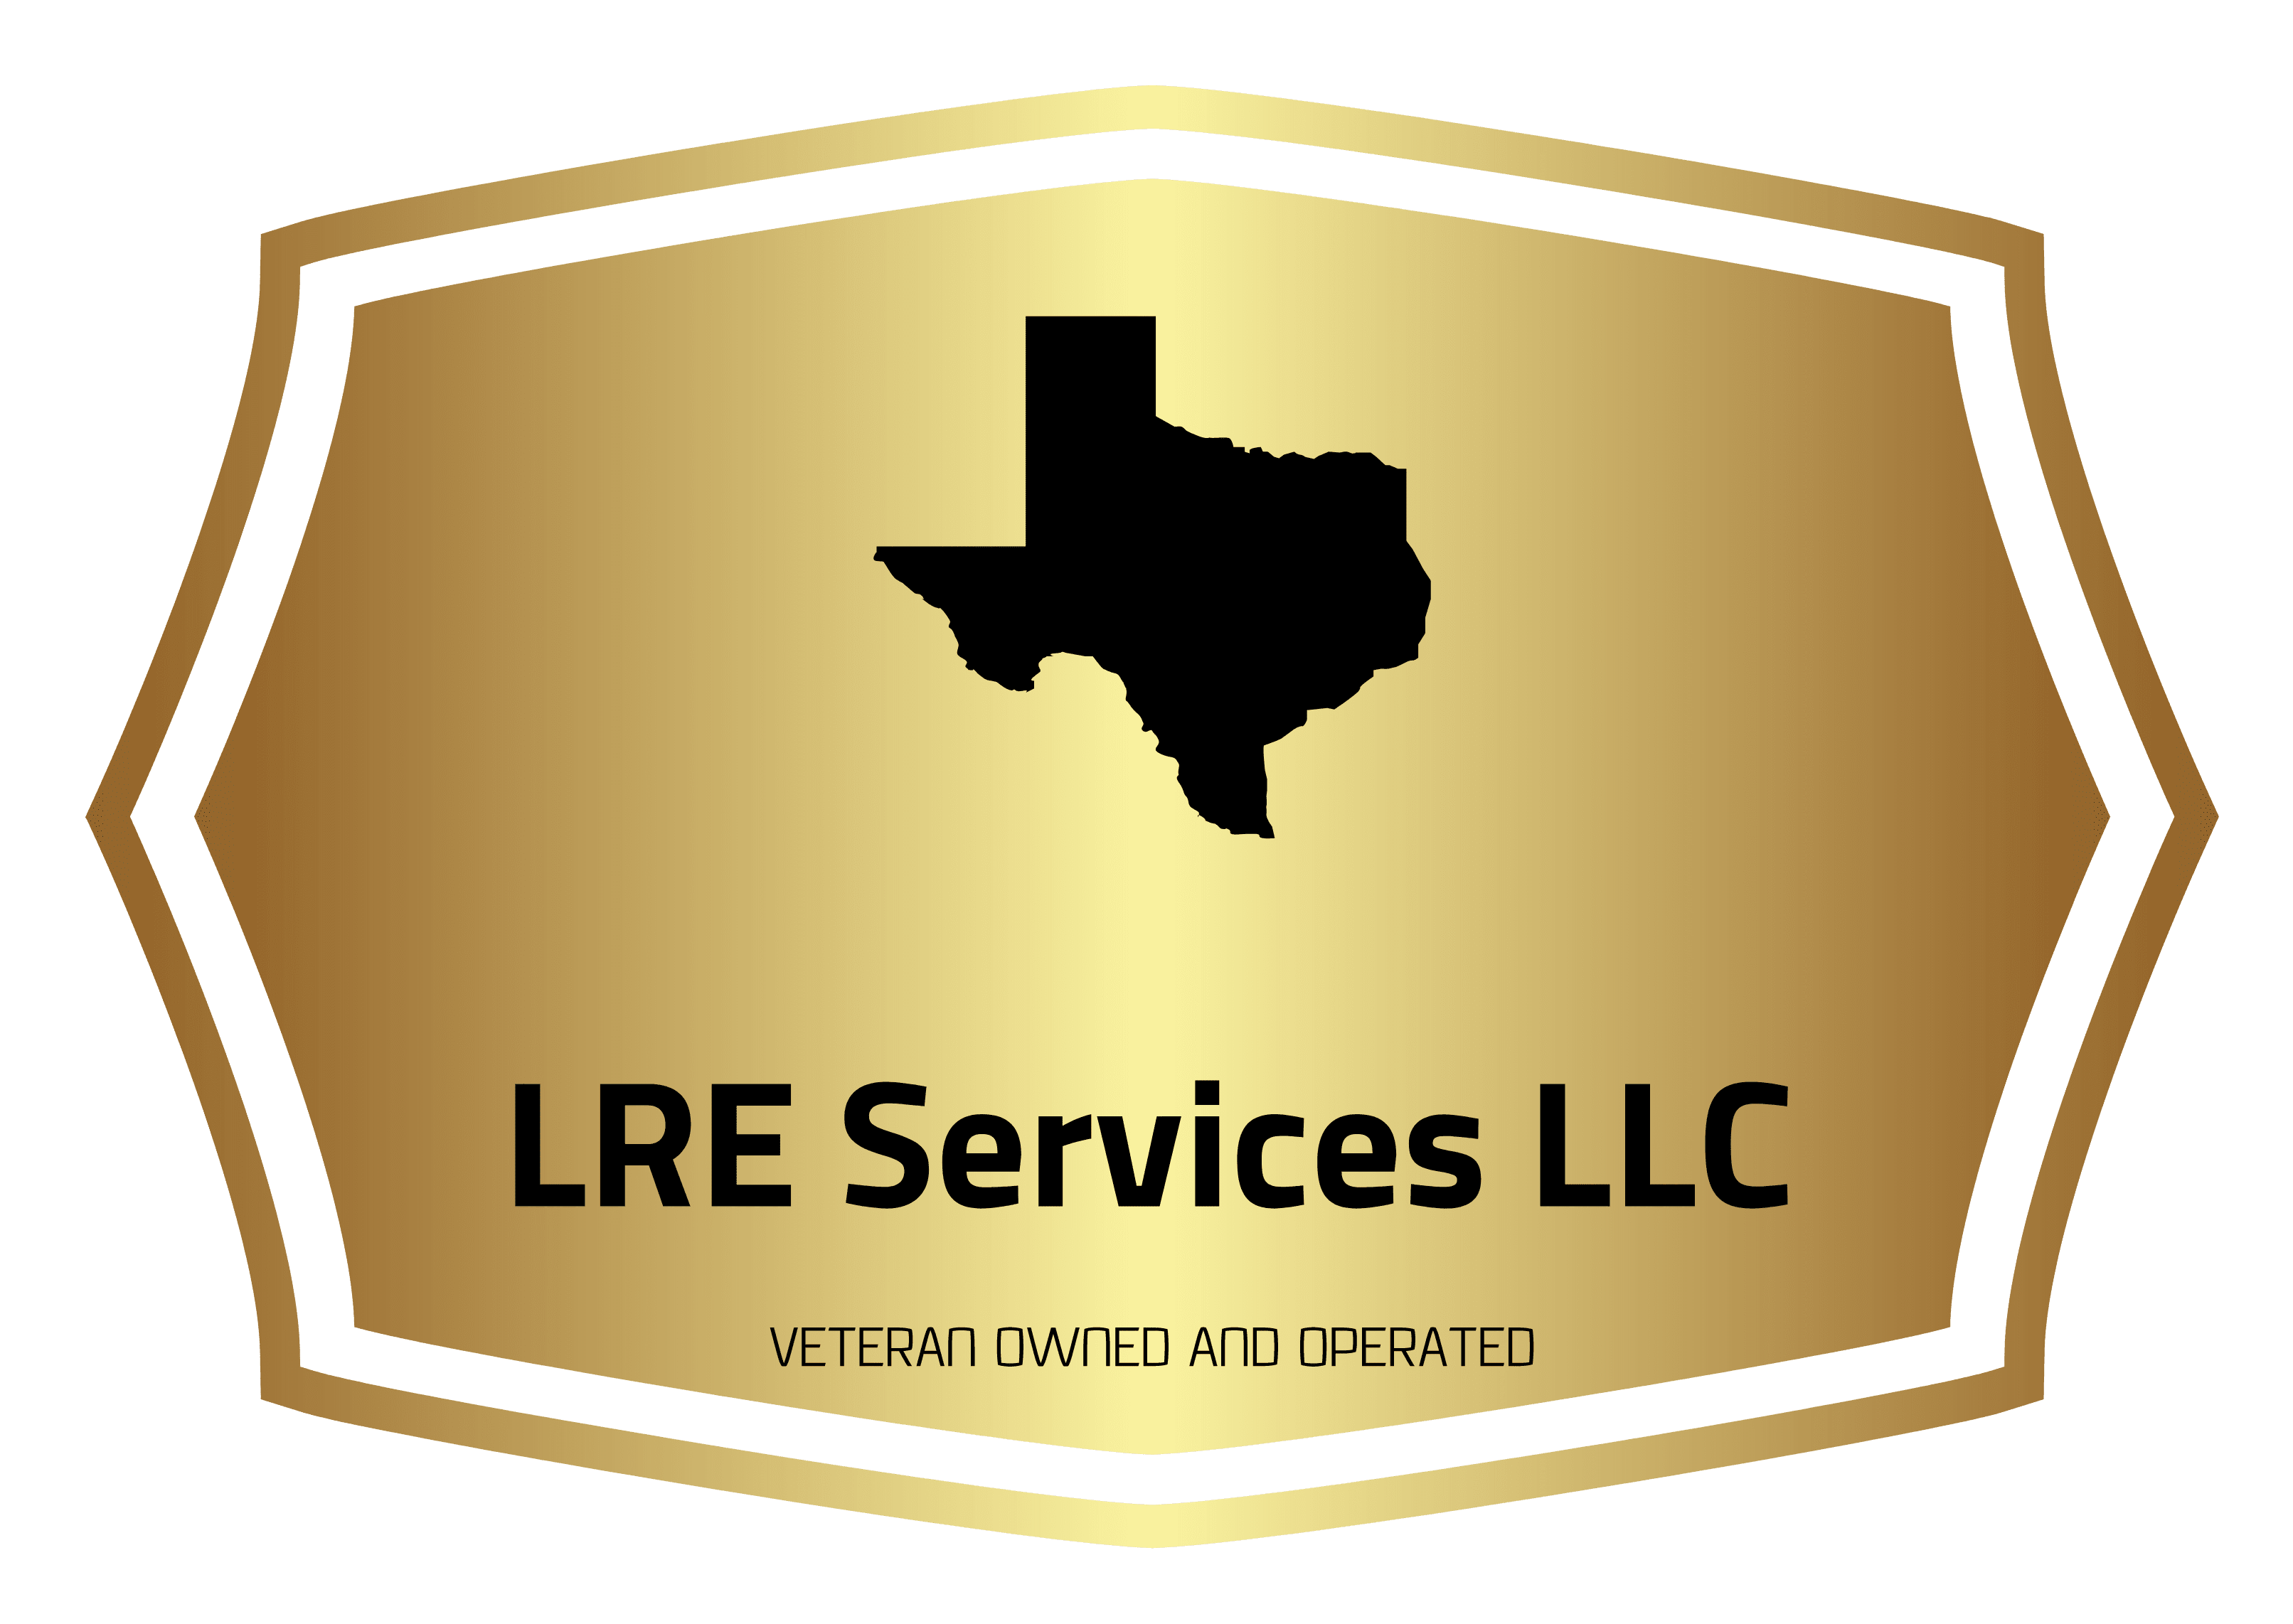 LRE Services